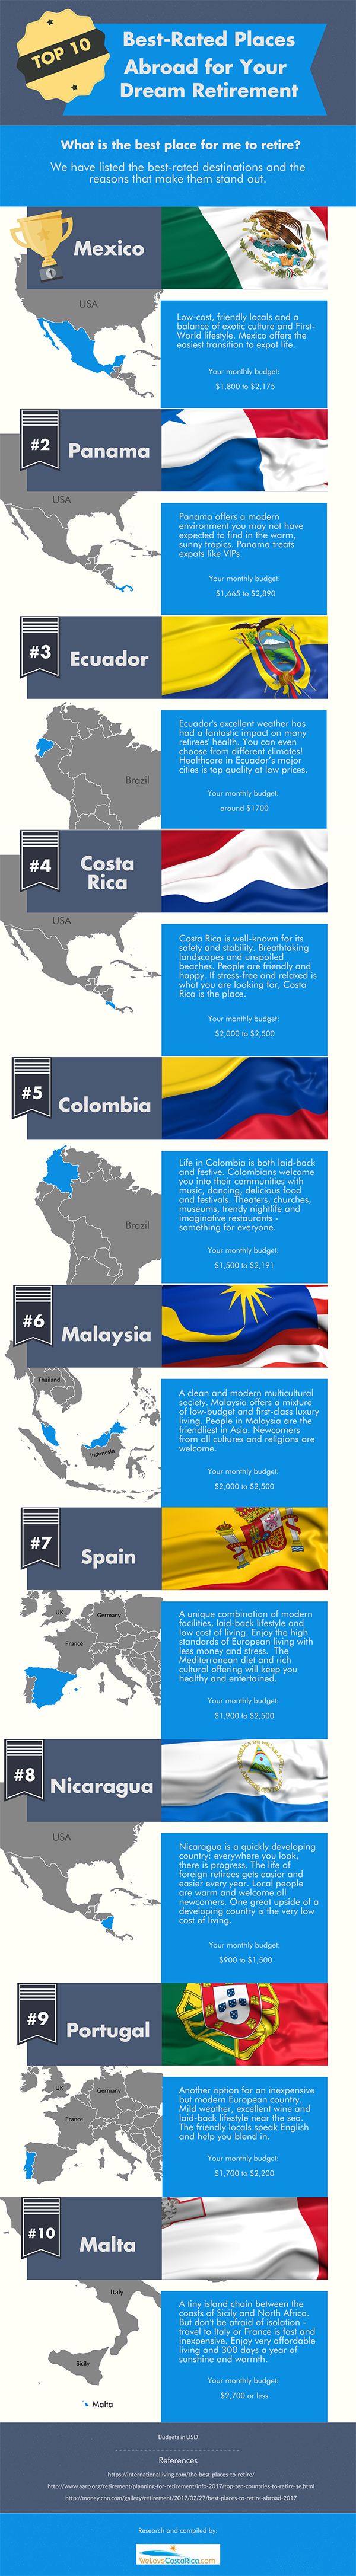 Infographic: Top 10 best-rated places abroad for your dream retirement